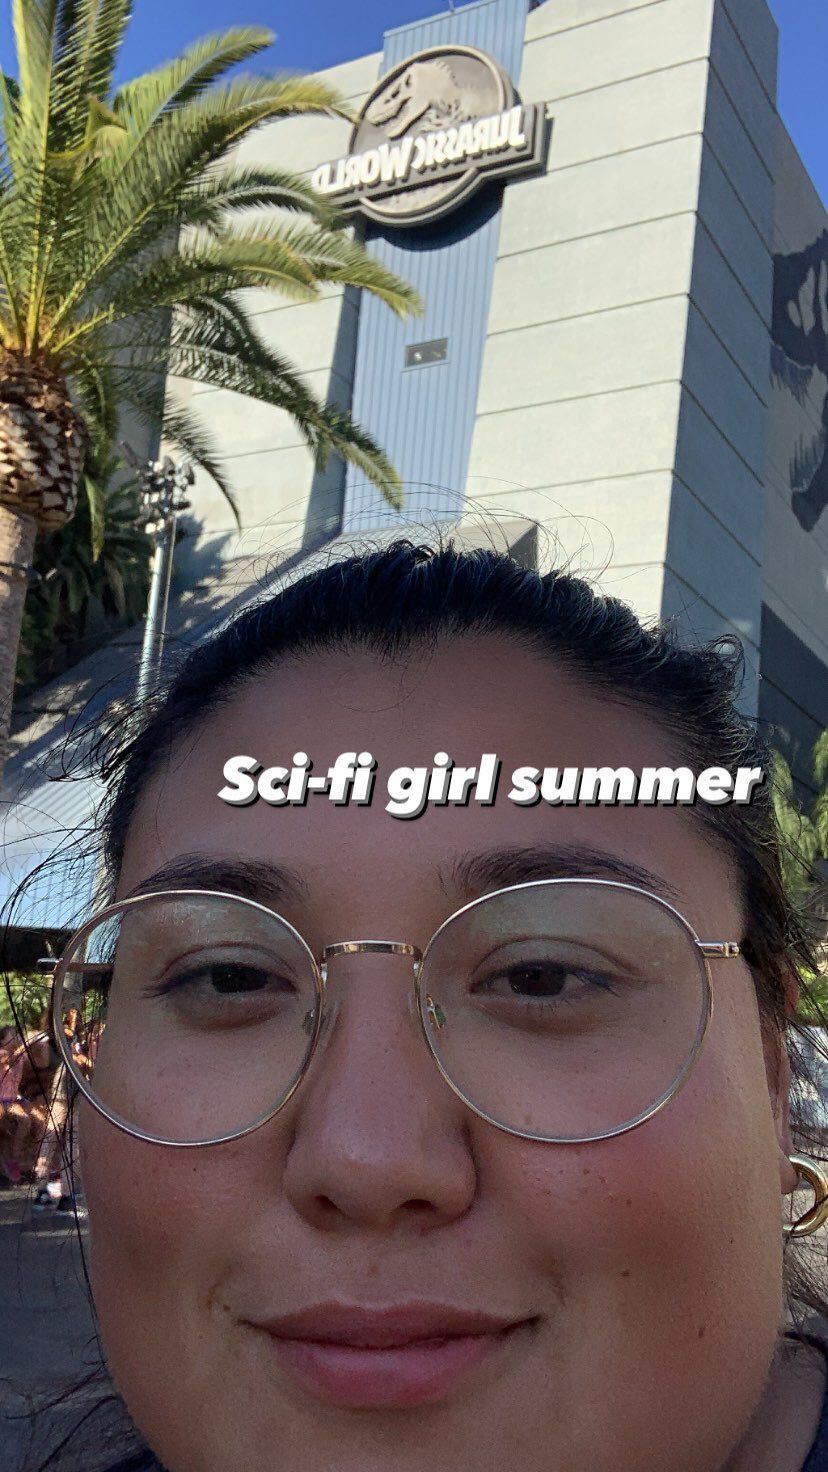 A screenshot of Em Win's Instagram story reading "Sci-fi girl summer" with a close-up of Em Win near a Jurassic Park ride